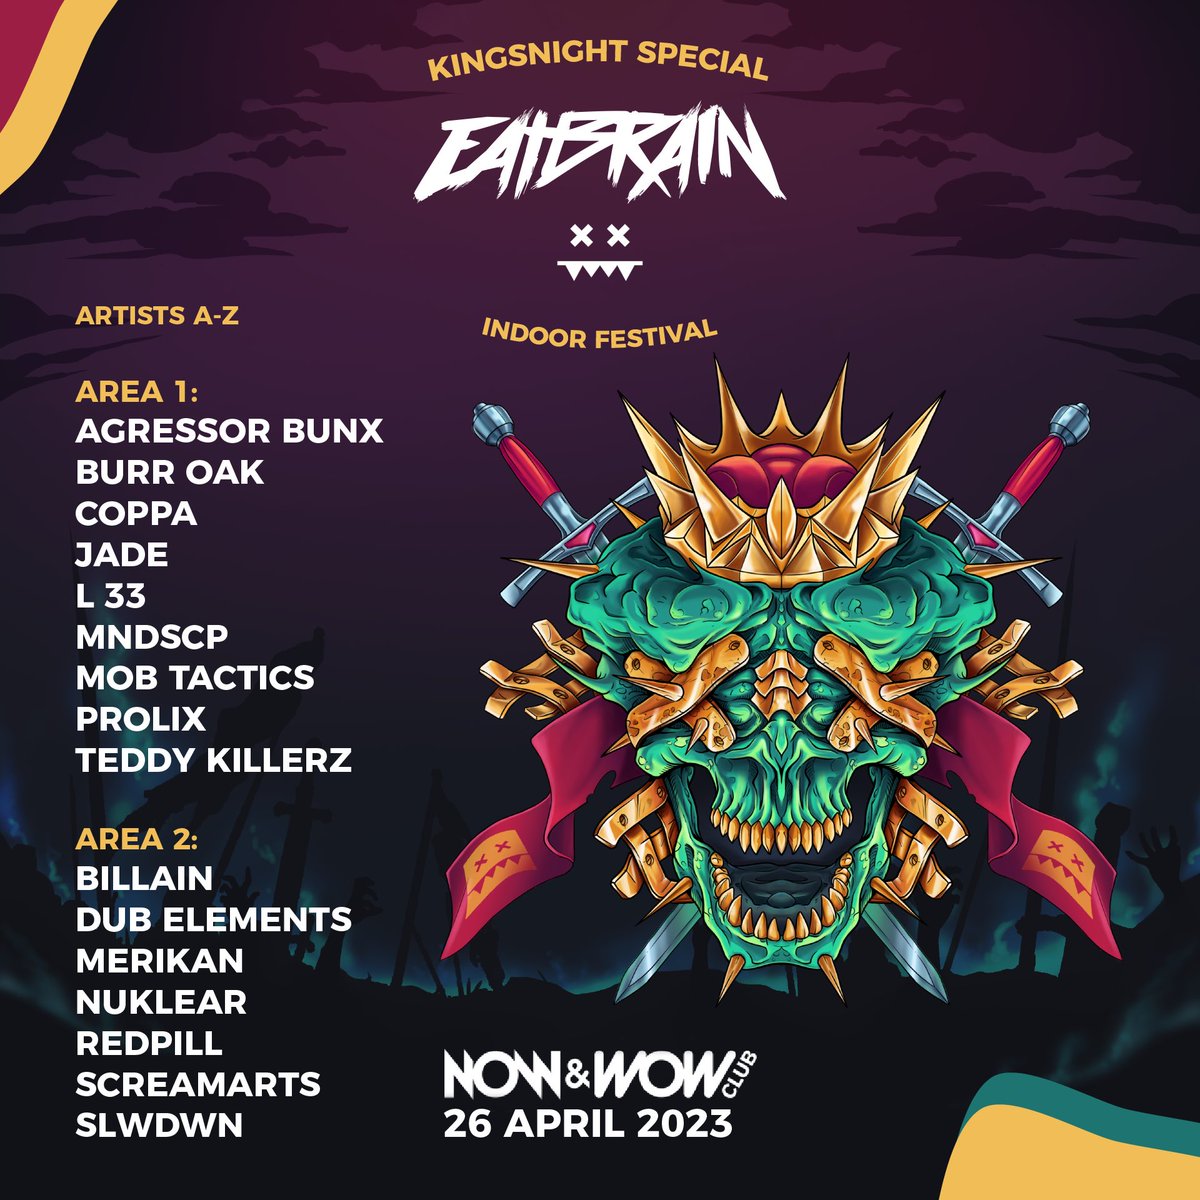 We present to you the line-up for the Eatbrain x Korsakov indoor festival! A night full of neuro with amazing Eatbrain artists!